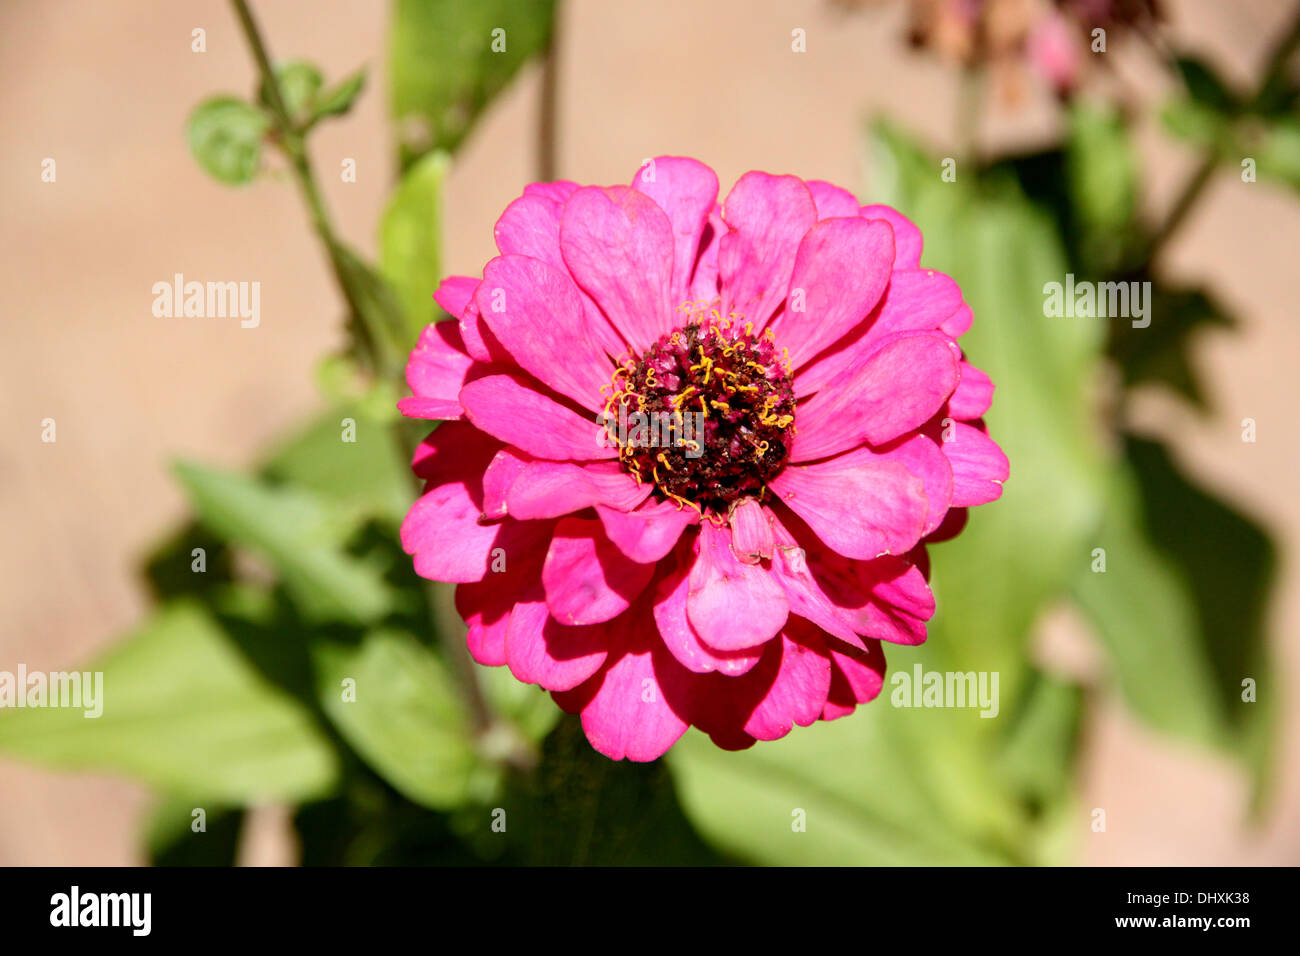 The Picture background of Pink flowers in the backyard. Stock Photo